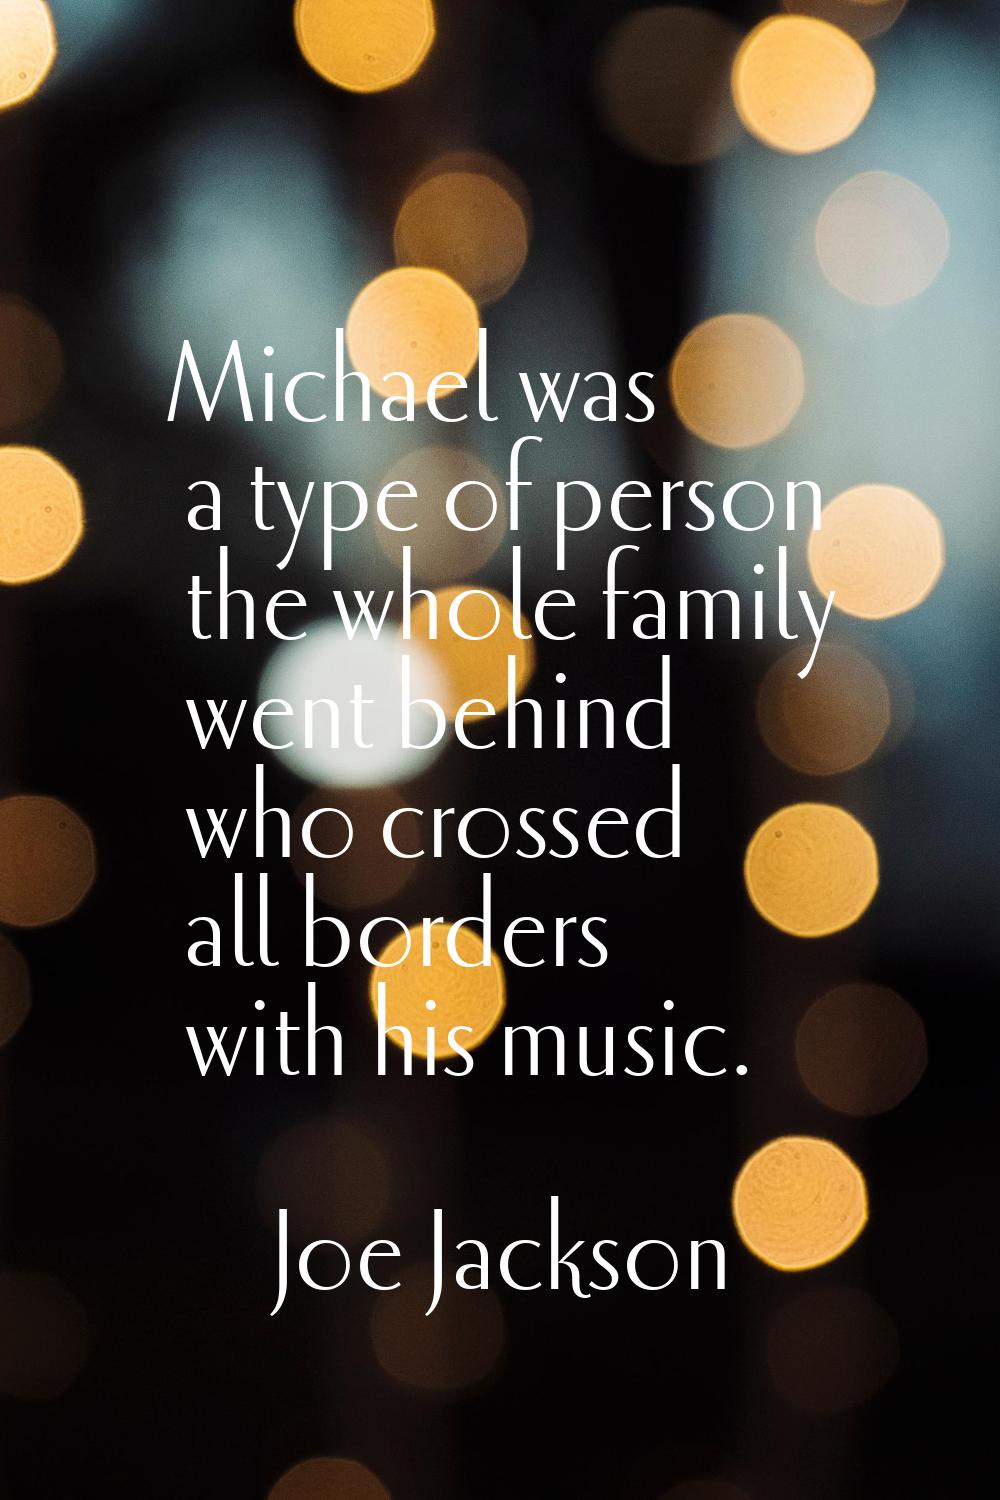 Michael was a type of person the whole family went behind who crossed all borders with his music.